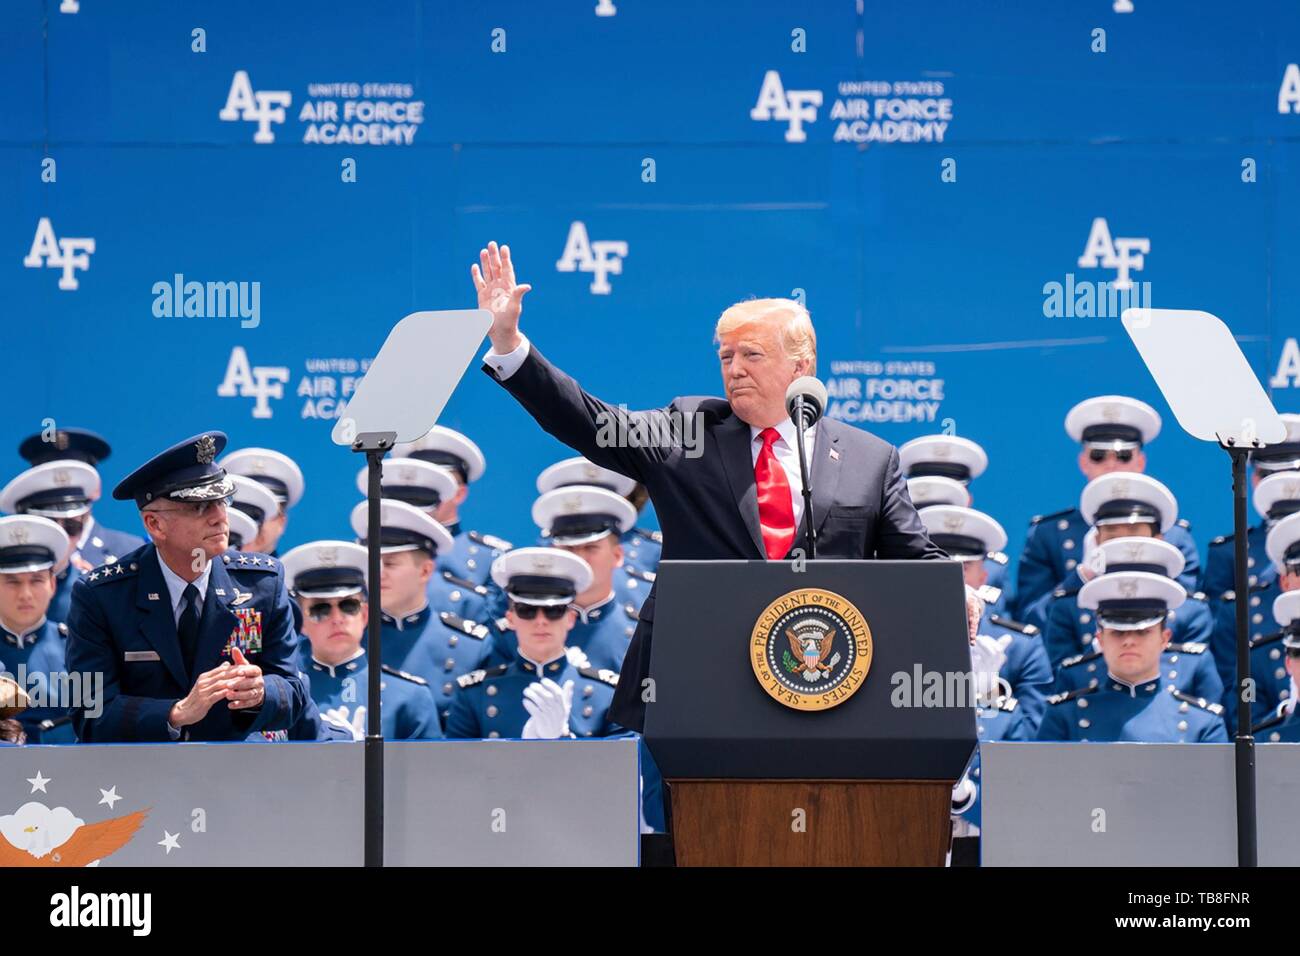 U.S President Donald Trump waves during his address at the U.S. Air Force Academy Graduation Ceremony at the USAF Academy Falcon Stadium May 30, 2019 in Colorado Springs, Colorado. Credit: Planetpix/Alamy Live News Stock Photo